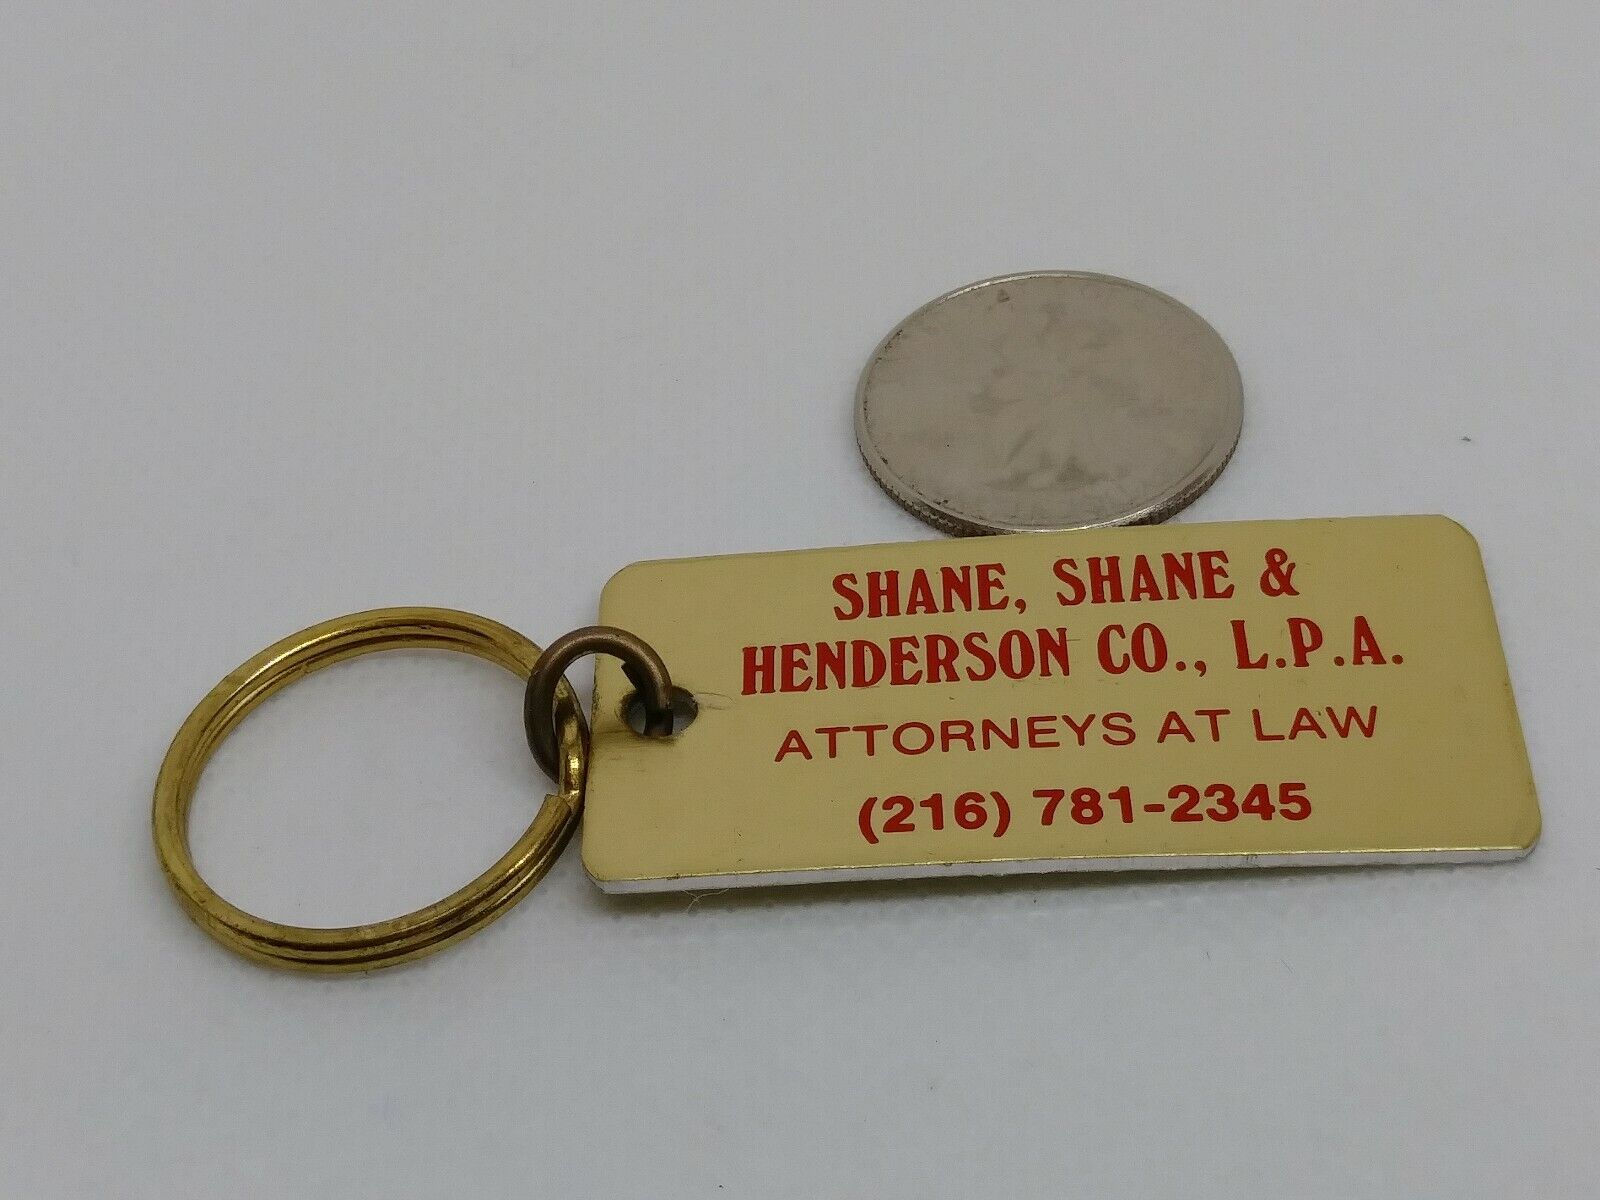 Vintage Metal Shane, Shane & Henderson Co L.P.A. Attorneys at Law Keychain 